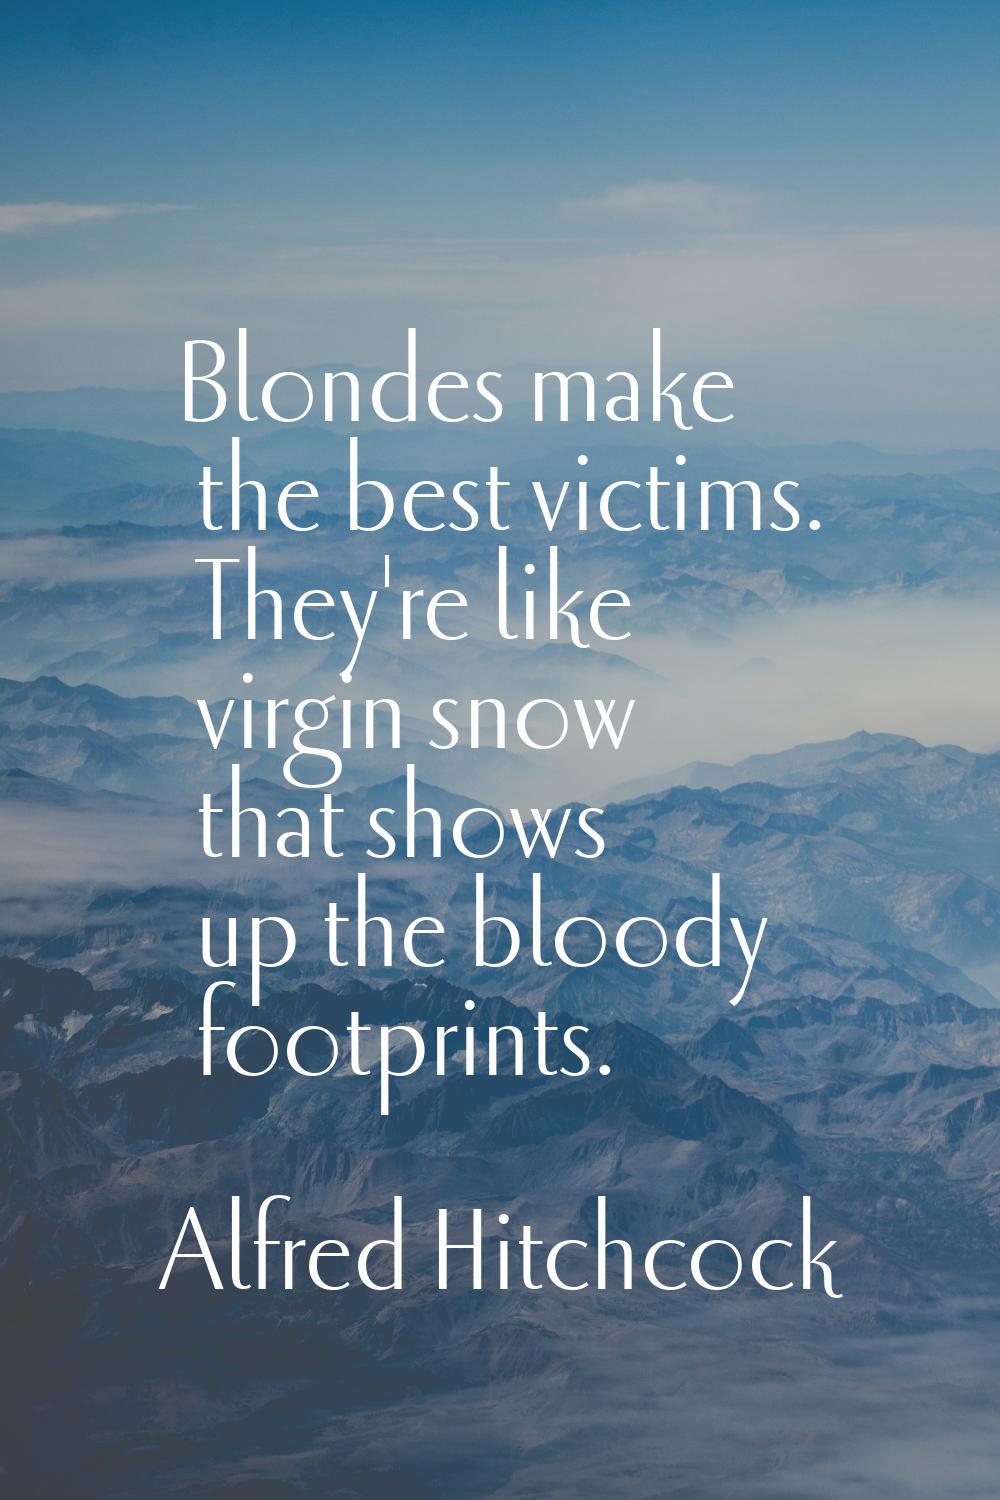 Blondes make the best victims. They're like virgin snow that shows up the bloody footprints.